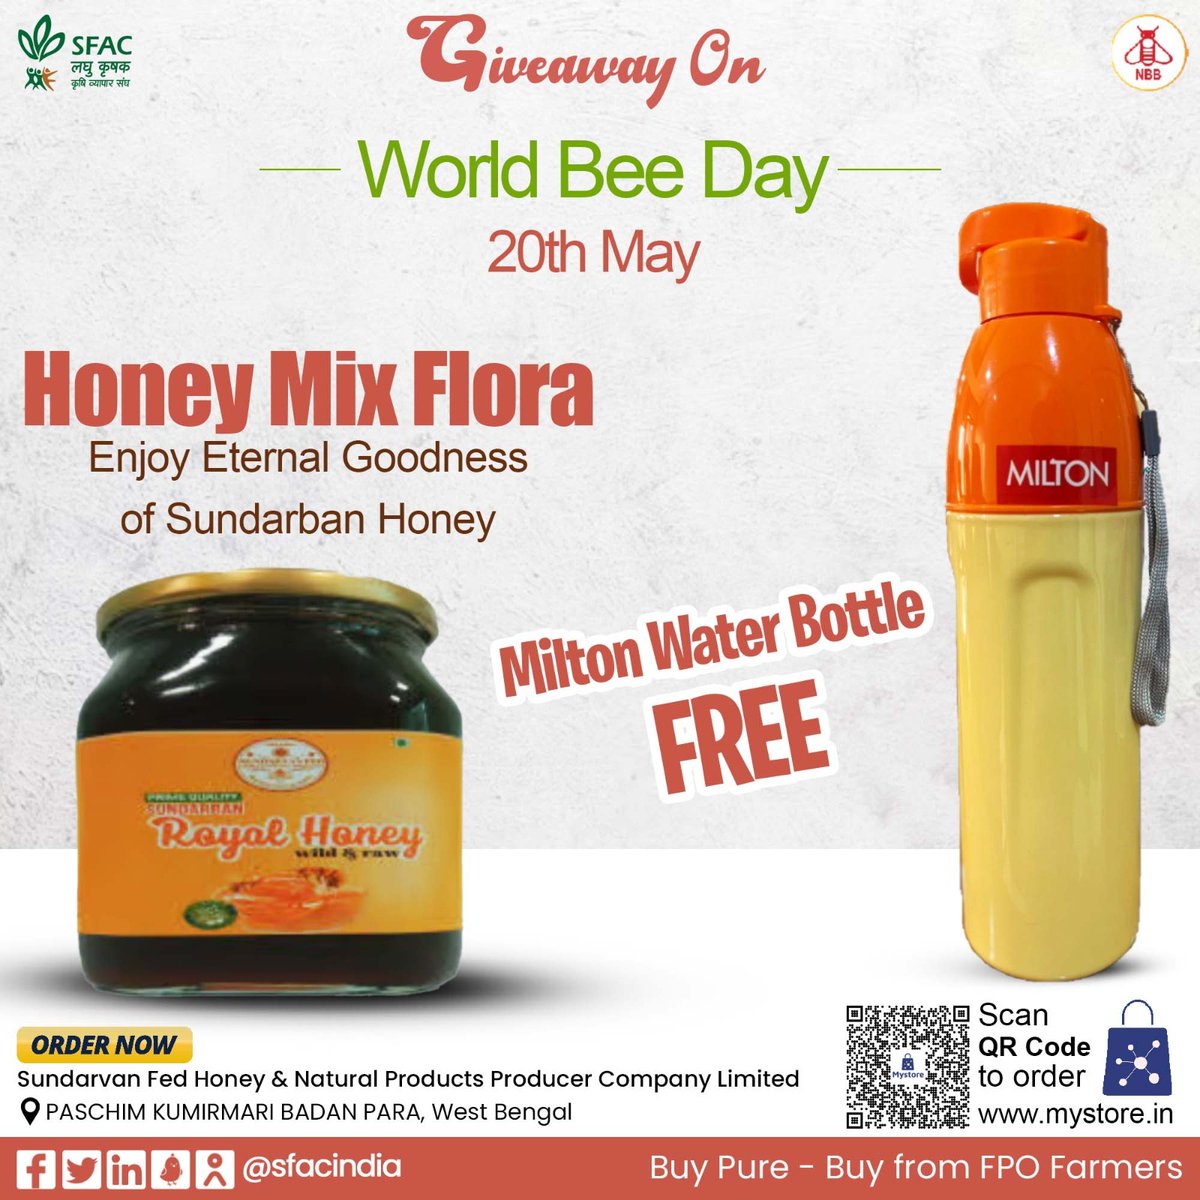 Giveaway on World Bee Day
20th May
Enjoy pure & nutritious mangrove forest honey straight from natural 🐝hives of Sundarban.
WIN a milton water bottle FREE.
Valid for first 5 orders

Buy straight from FPO farmers👇
mystore.in/en/product/hon…

🍯

 #VocalForLocal #healthychoices #NBB